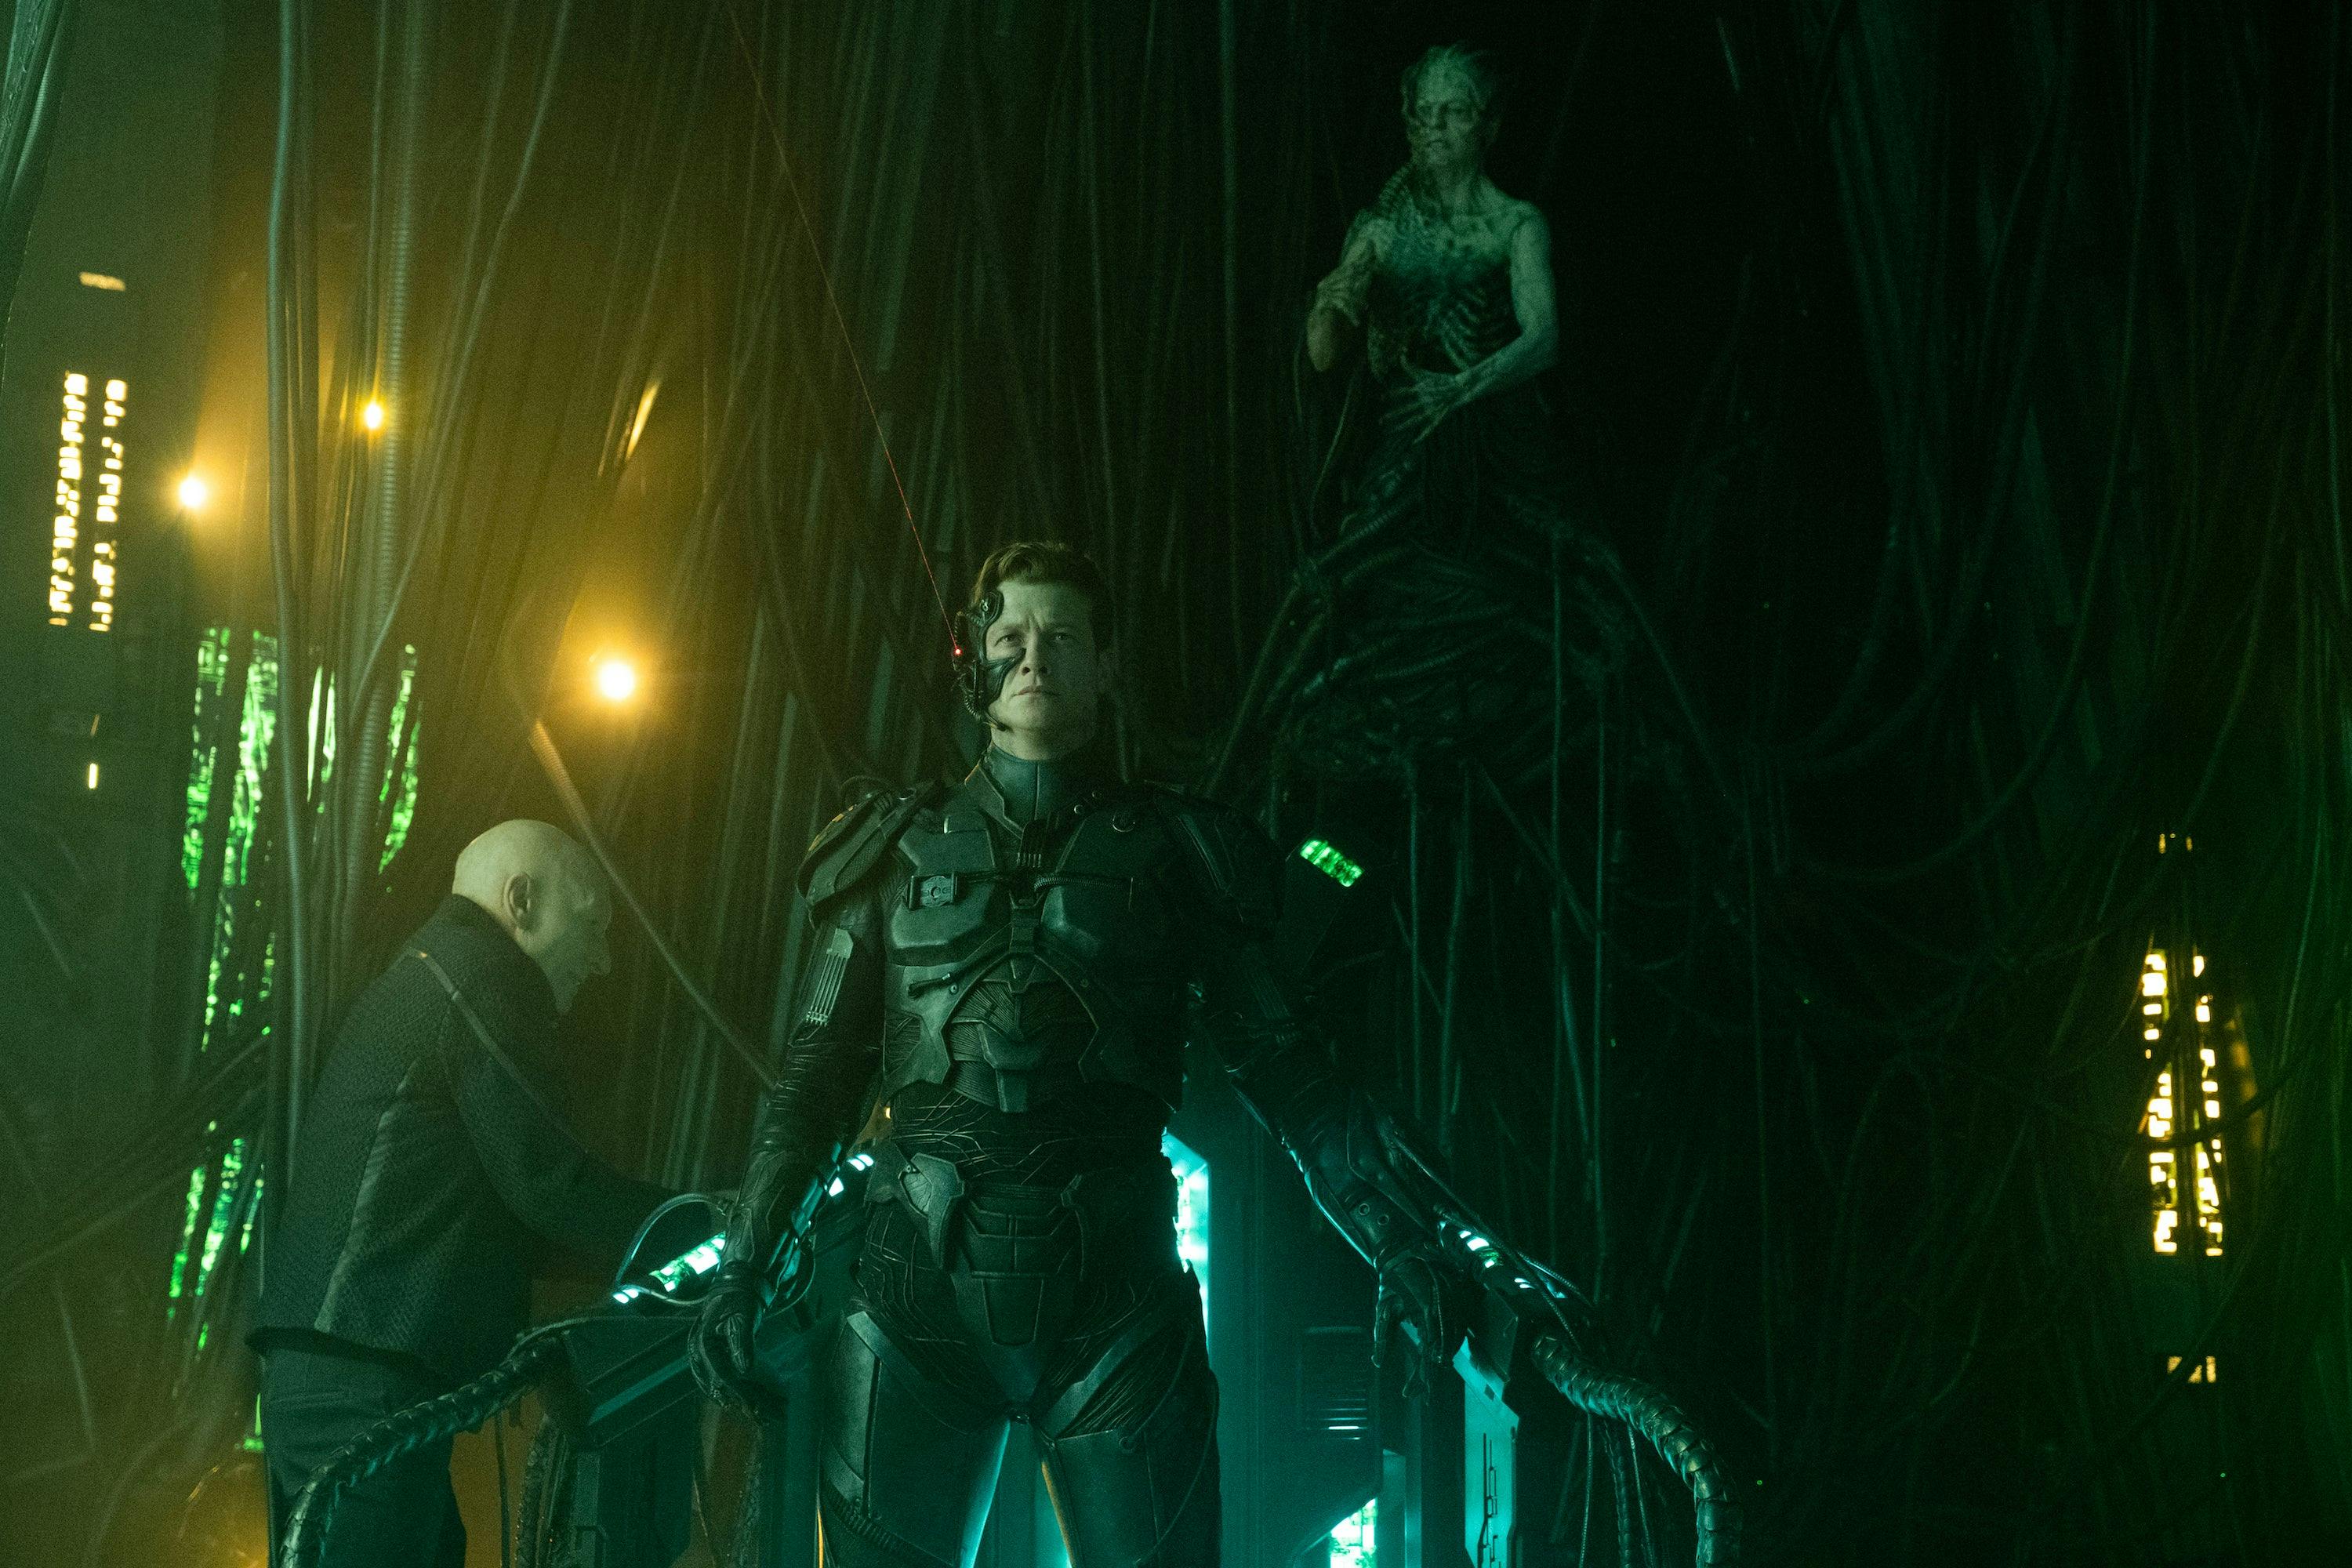 On the Borg Cube, Jean-Luc rushes to a console as Jack Crusher as Vox stands assimilated with the Borg Queen controlling him from above in 'The Last Generation'